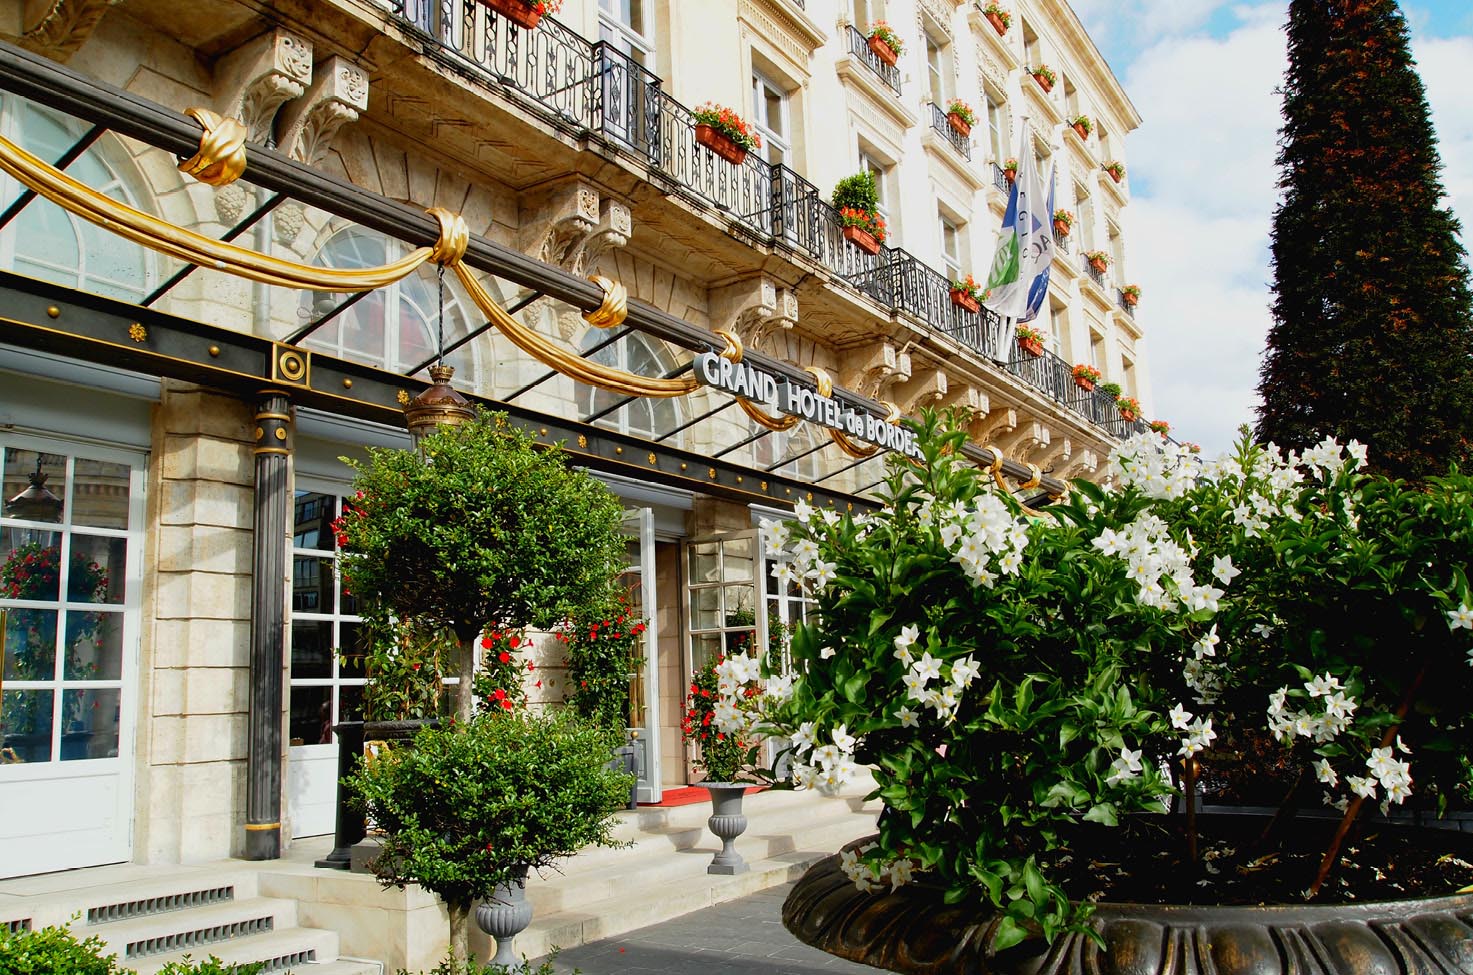 The exterior of the Intercontinental Bordeaux hotel with its white bricks and gold detailing on a bright day with greenery and white flowers in front.